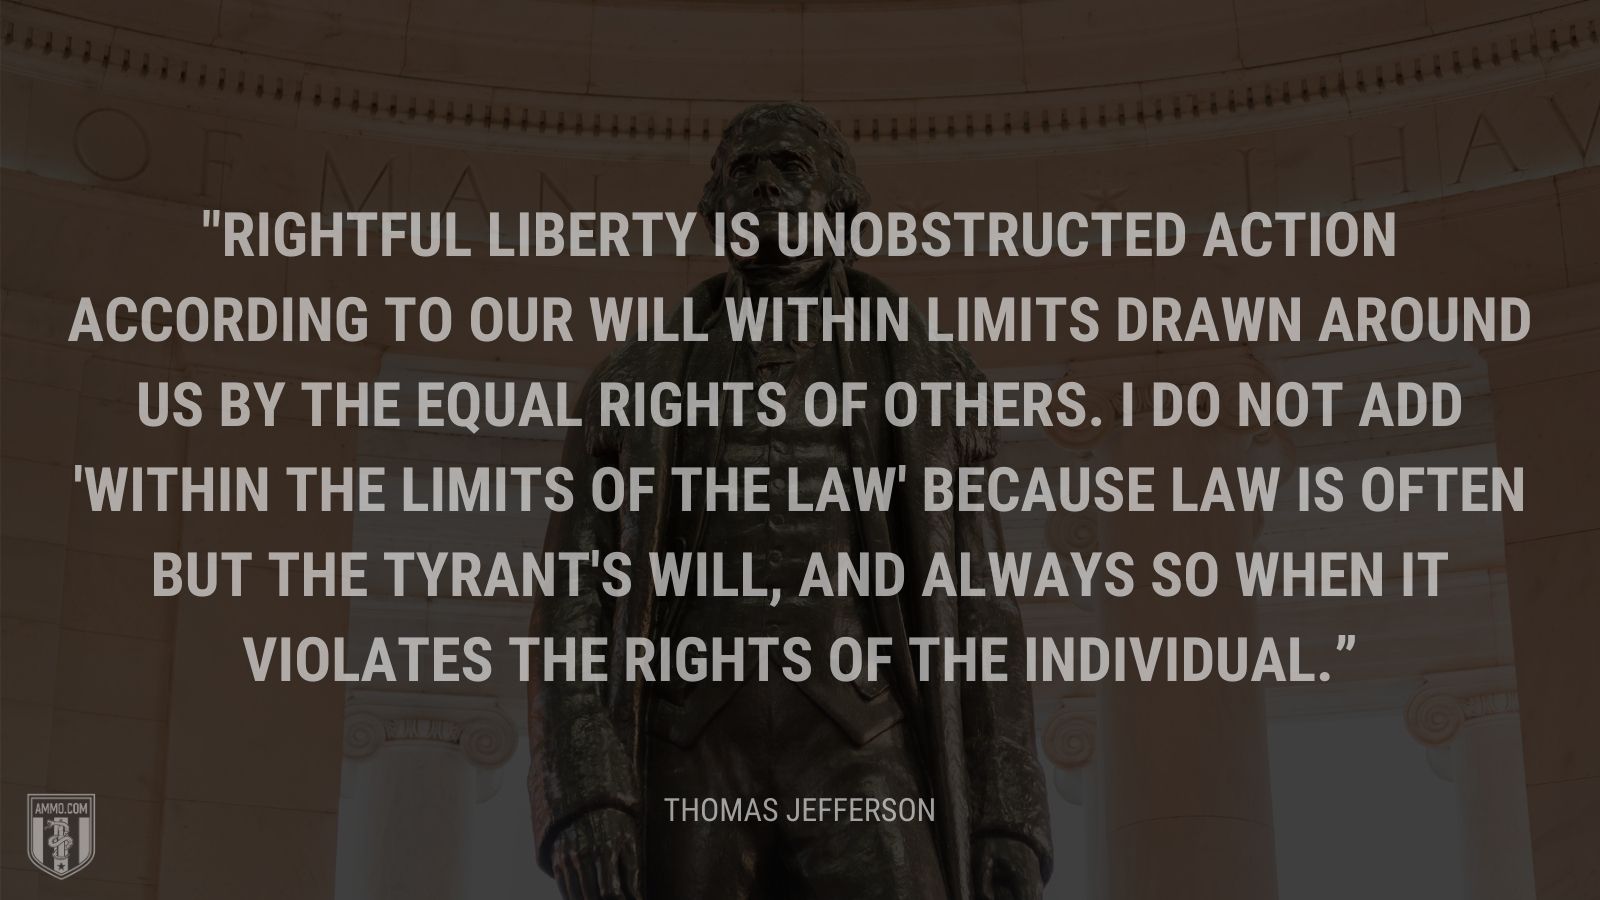 “Rightful liberty is unobstructed action according to our will within limits drawn around us by the equal rights of others. I do not add 'within the limits of the law' because law is often but the tyrant's will, and always so when it violates the rights of the individual.” - Thomas Jefferson